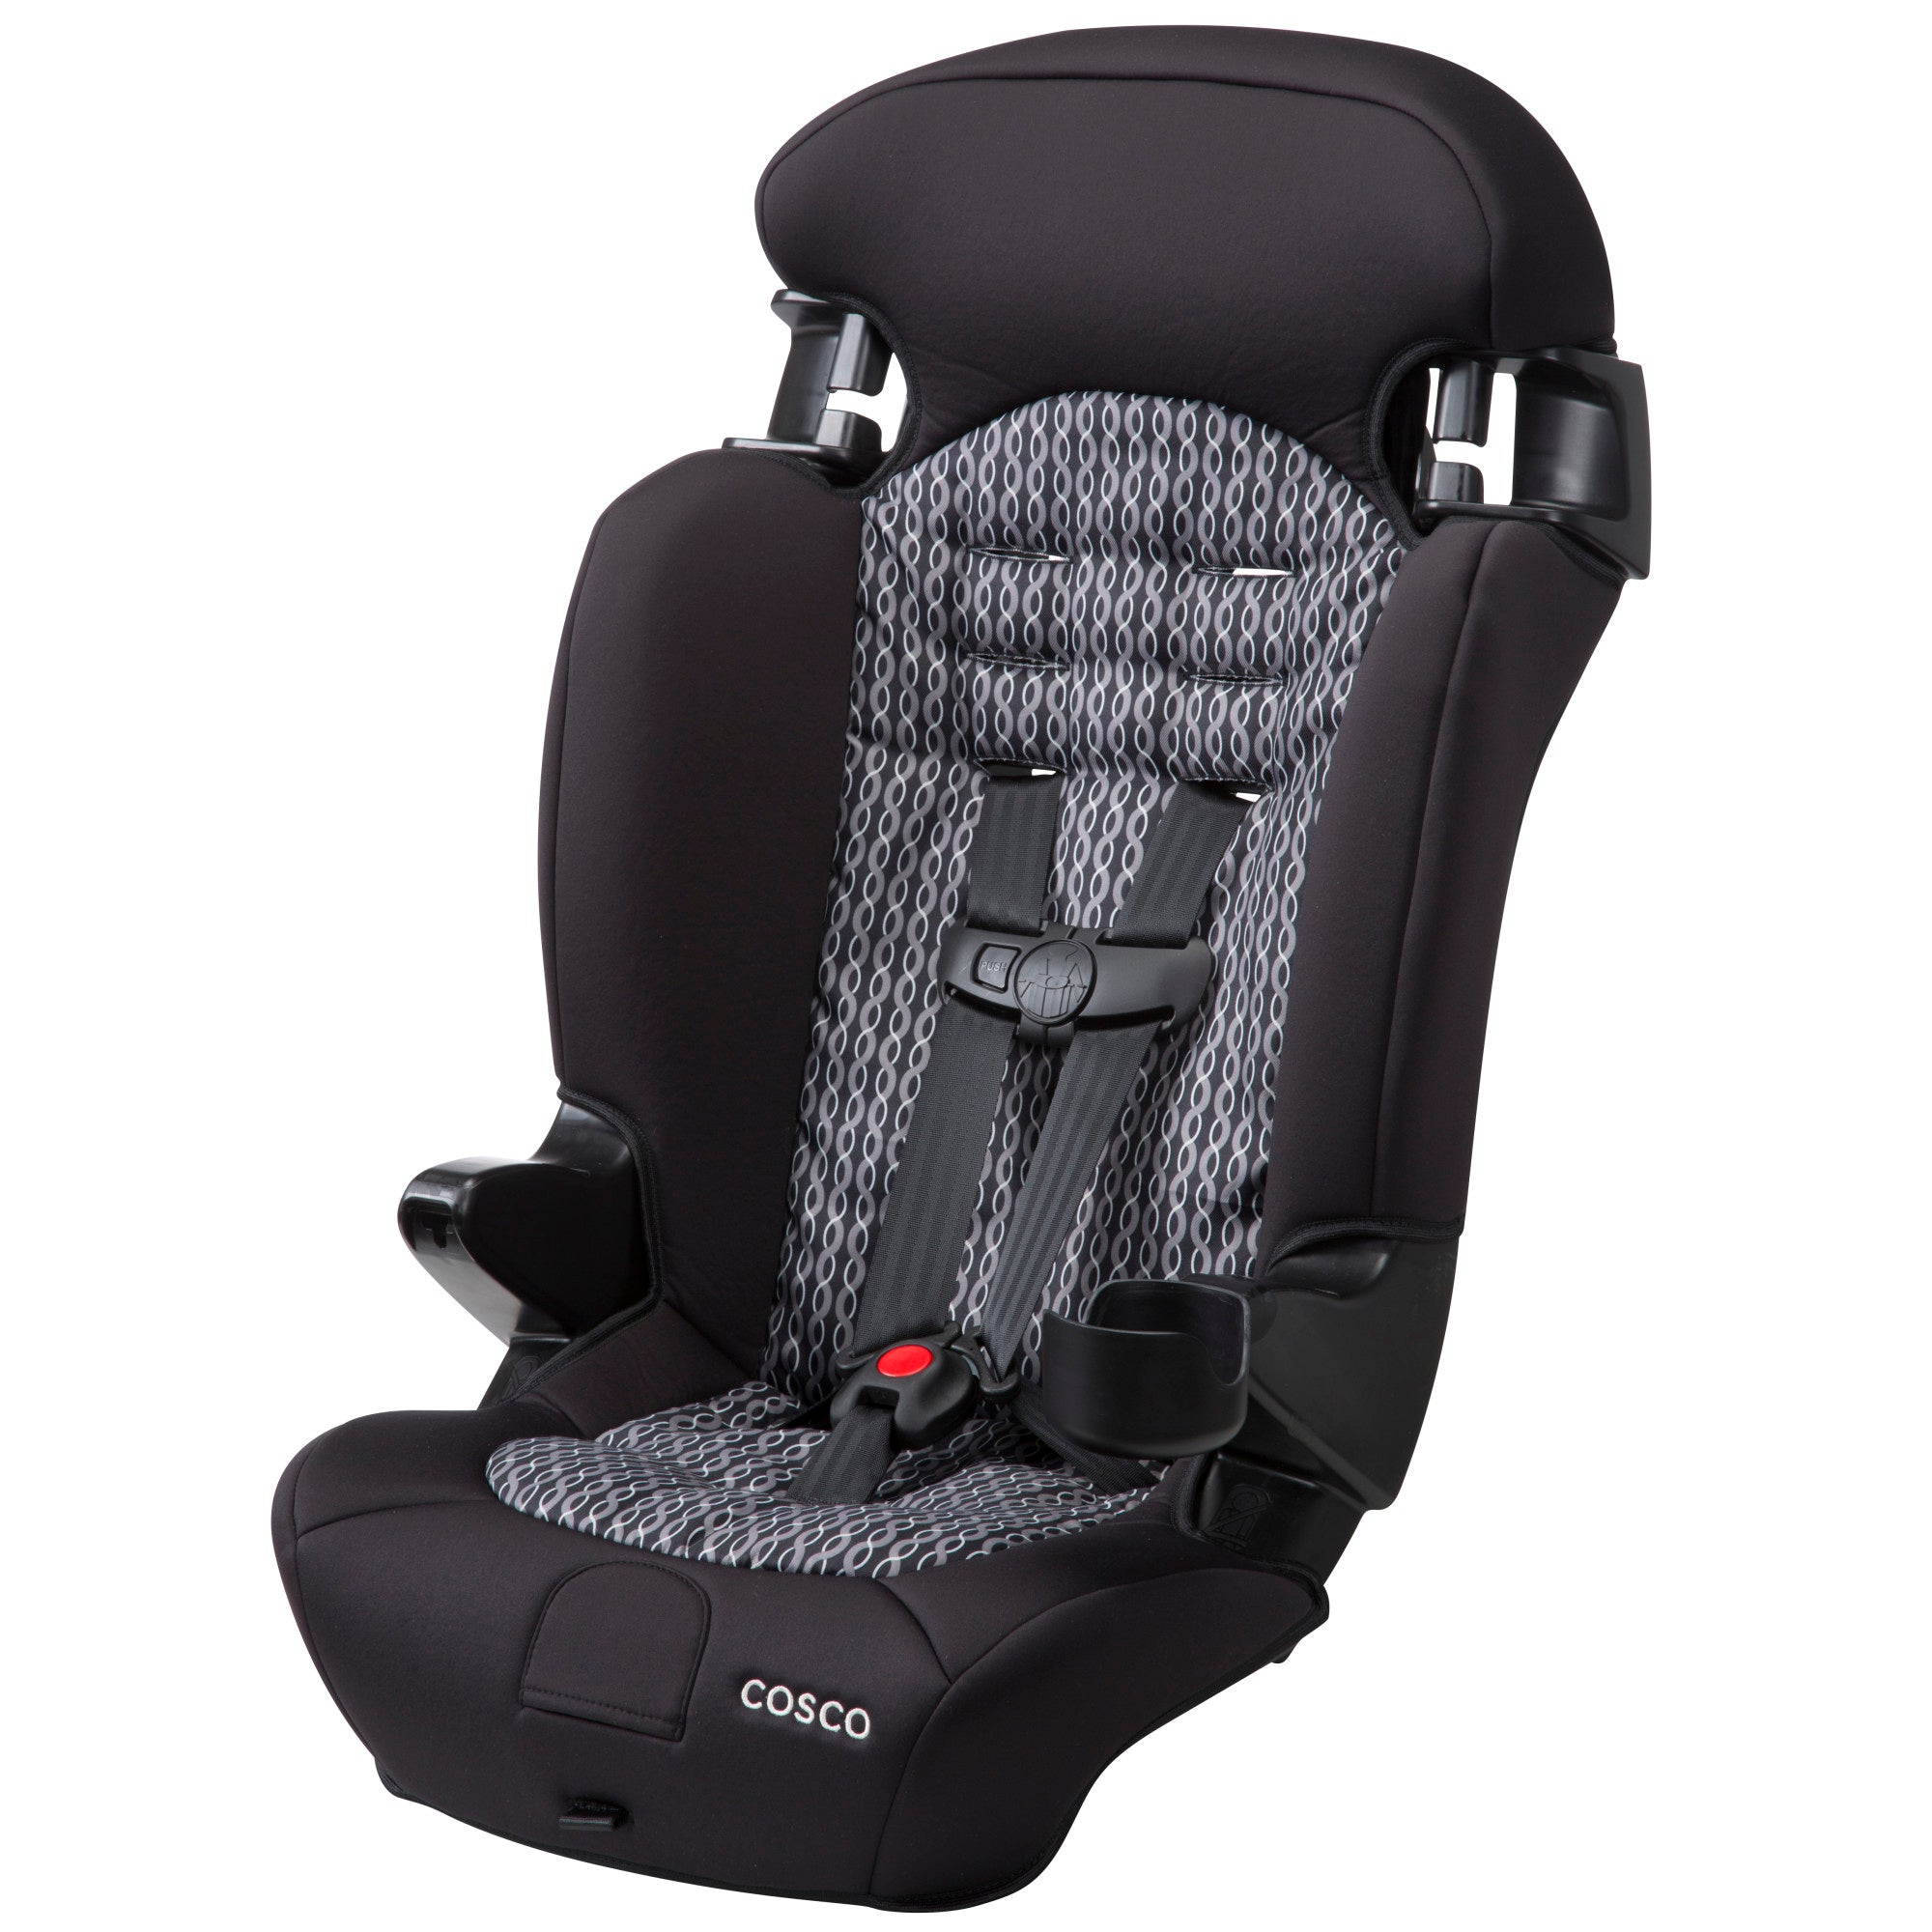 Finale 2-in-1 Booster Car Seat - Braided Twine